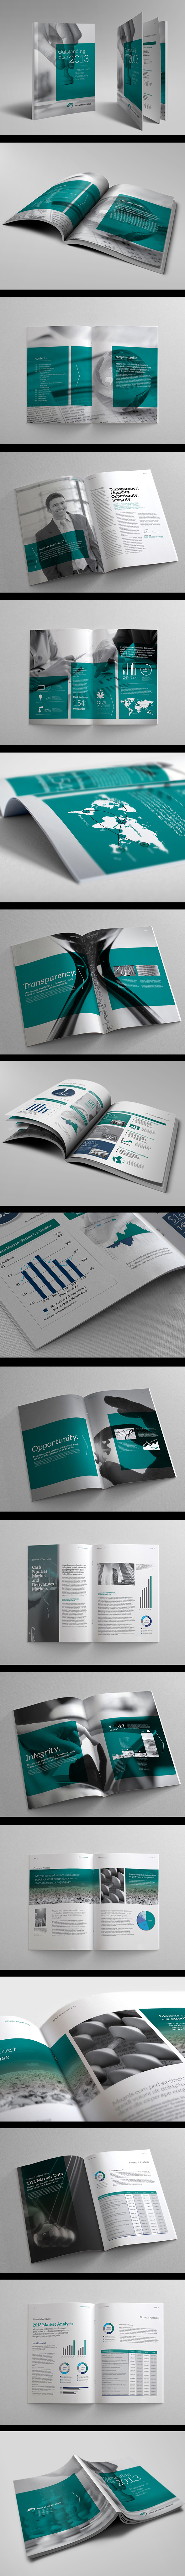 financial printing corporate profile annual report template brochures contemporary indesign template grey minimal design business modern Layout green